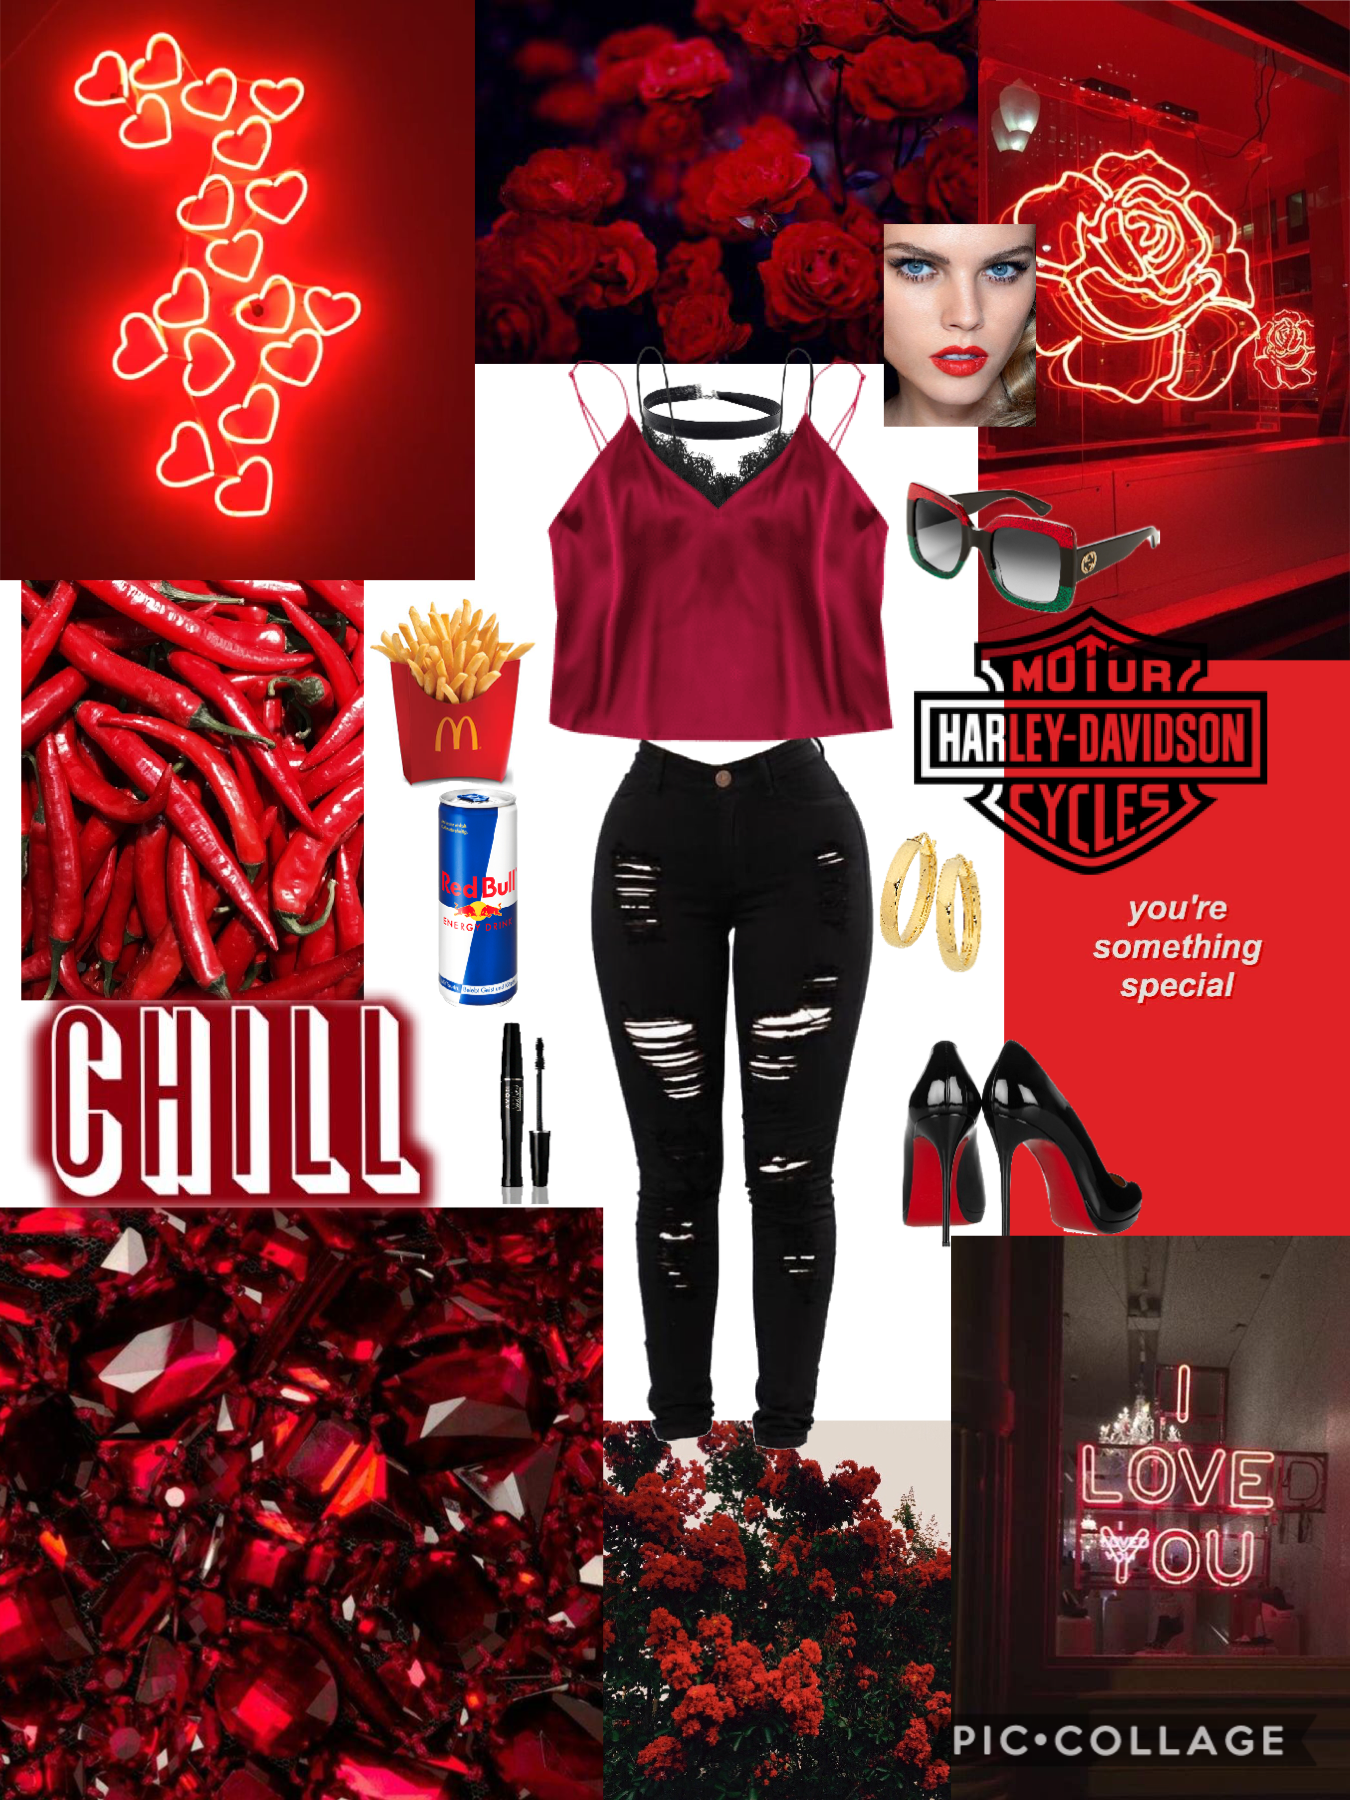 Red ❤️
Hope you guys like this red themed outfit! 

#Red #color #style #collage #outfit #fire #redflames #lips #chill #redbull #gemstone #ruby #like #gold #loud #confidence 